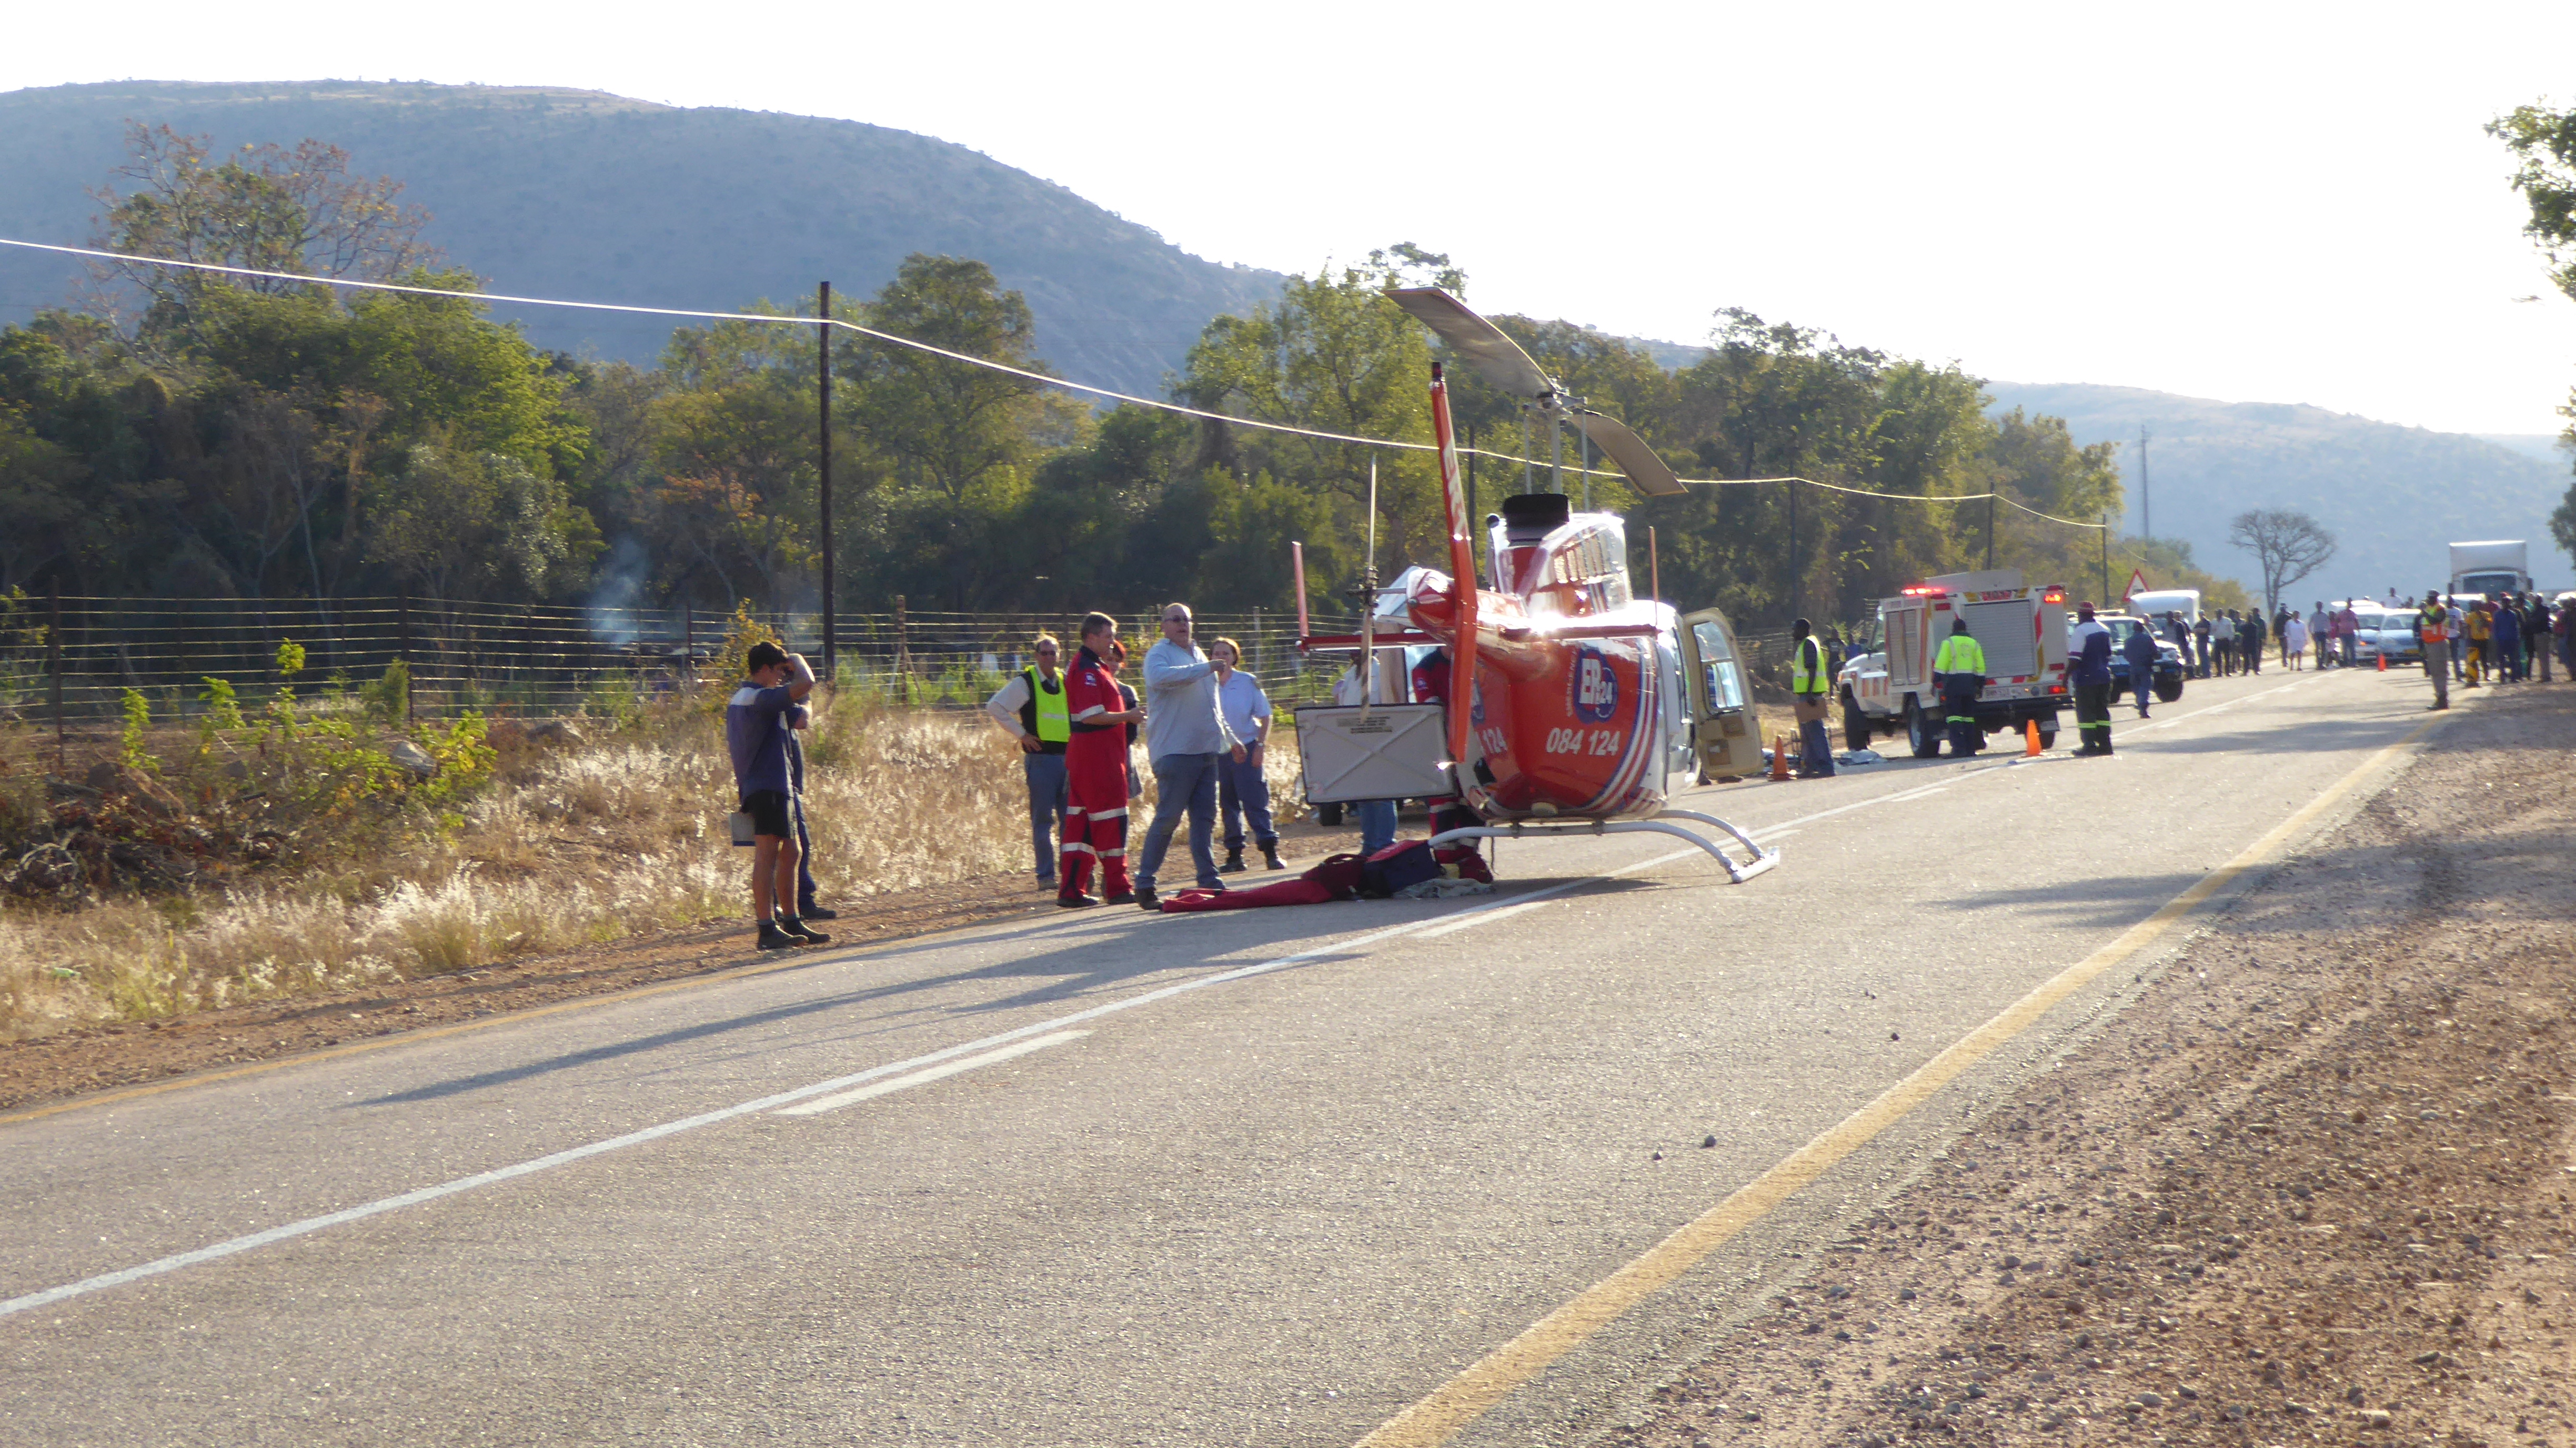 Helicopter evacuates the injured, after landing on the highway.